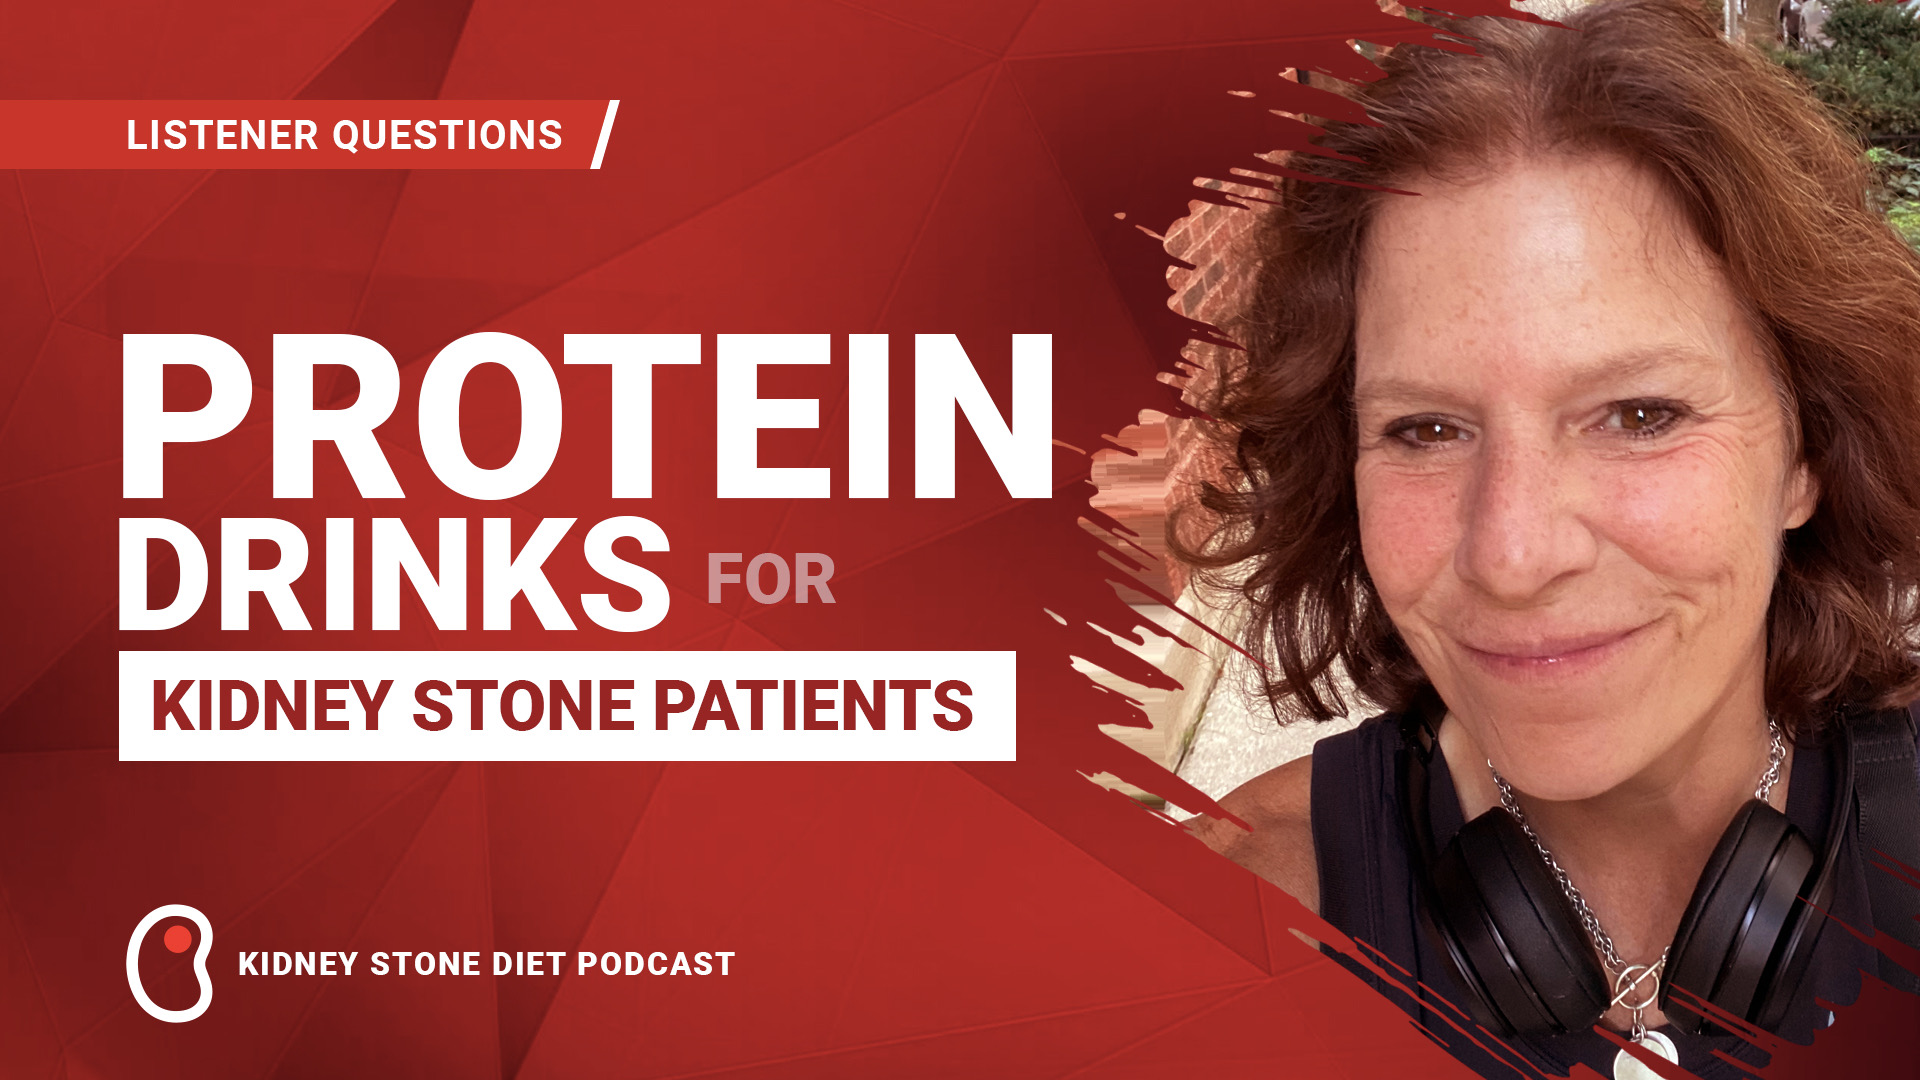 Protein drinks for kidney stone patients